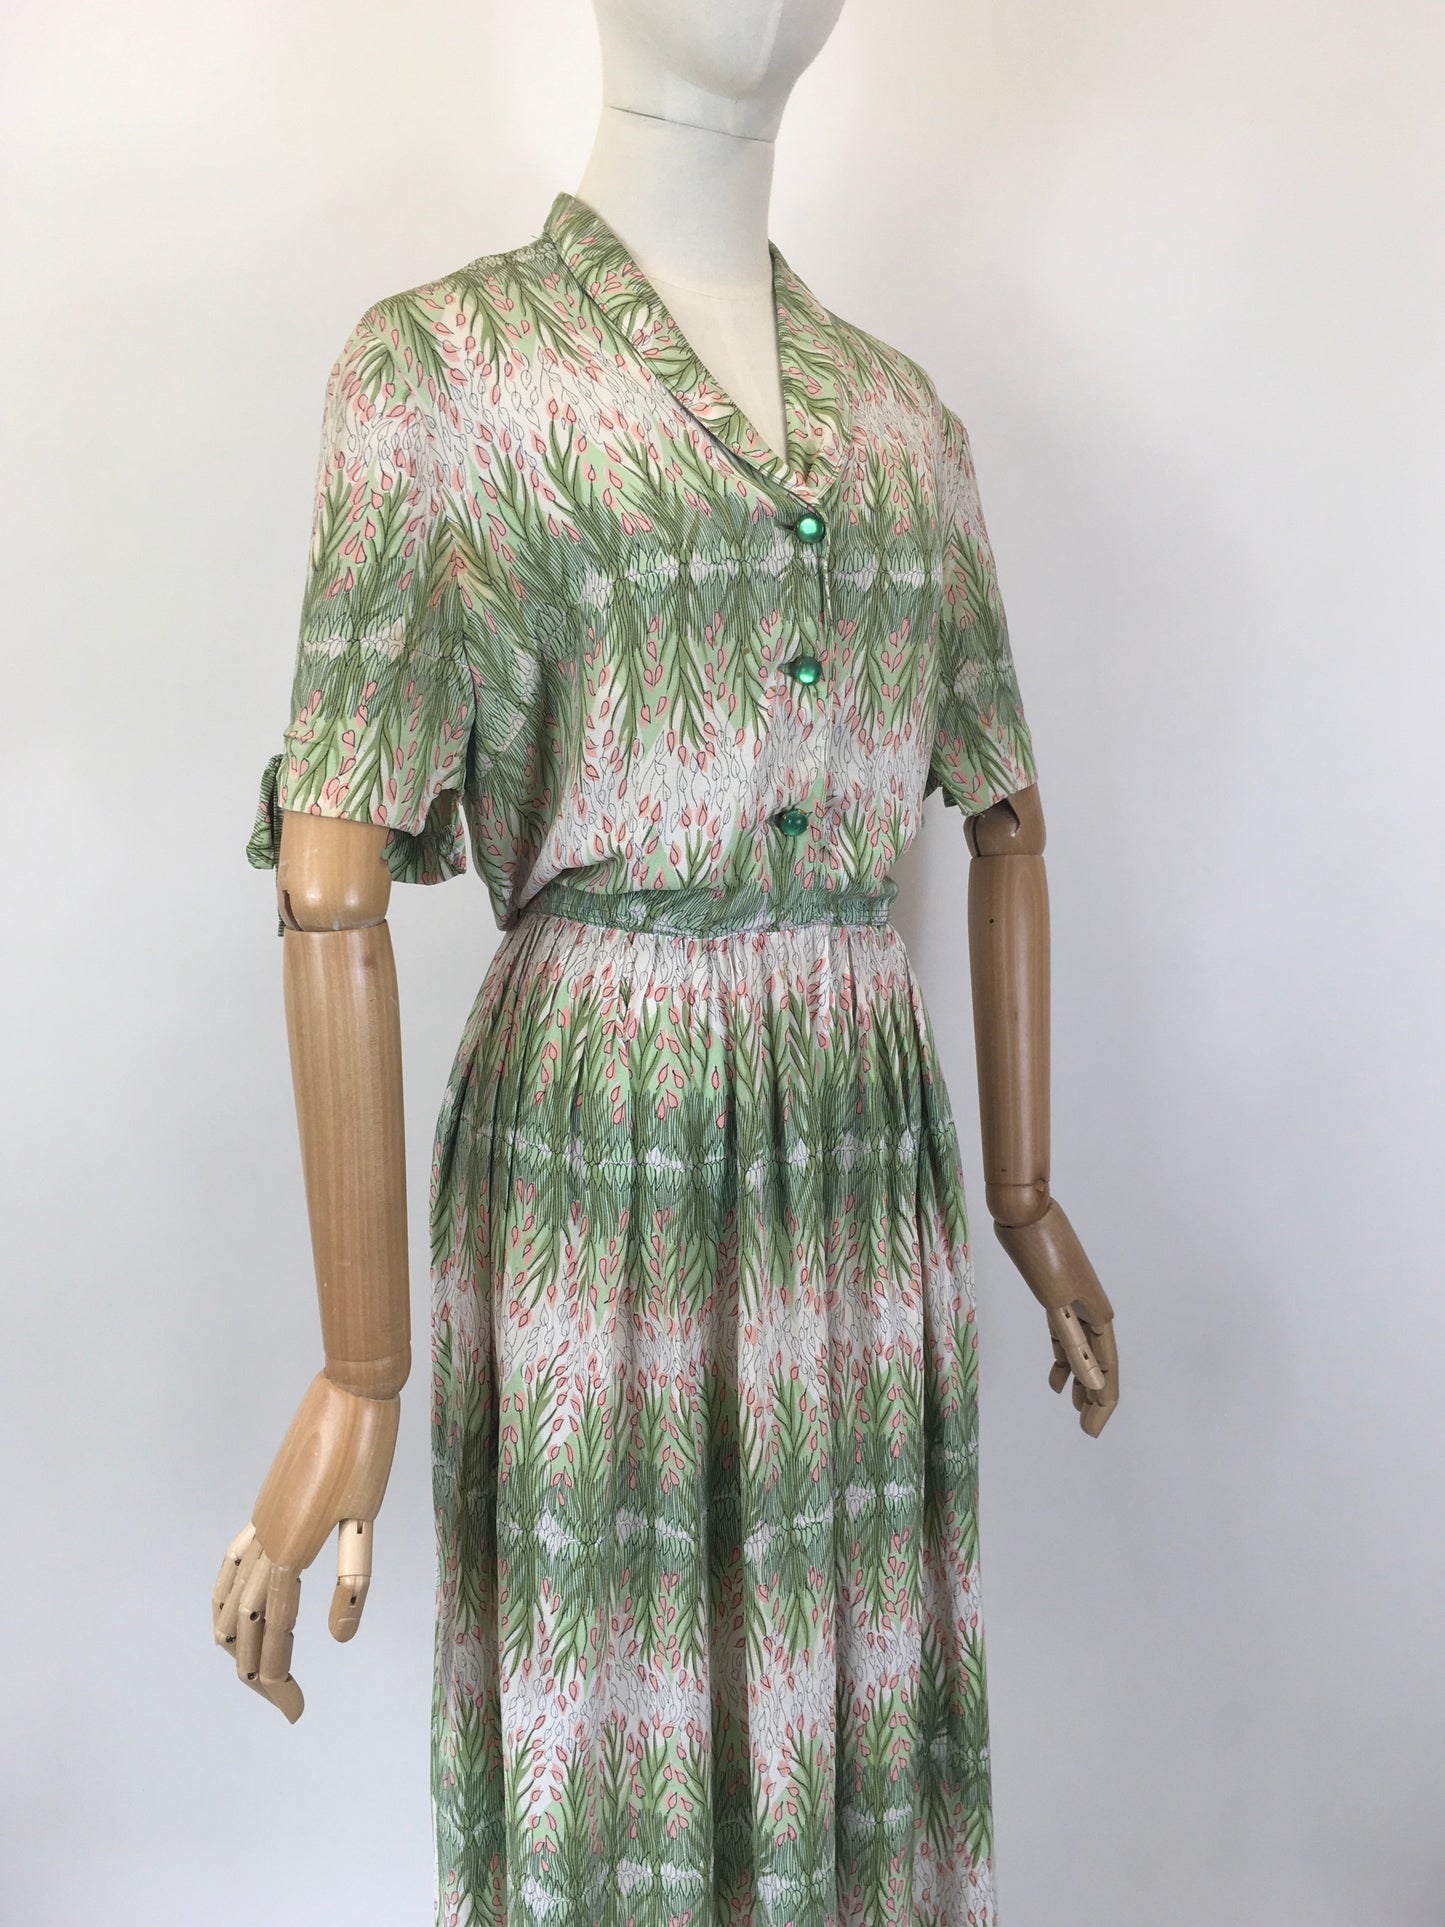 Original 1940’s Stunning Rayon Crepe Dress - In the Prettiest Floral in Powdered Rose and Green